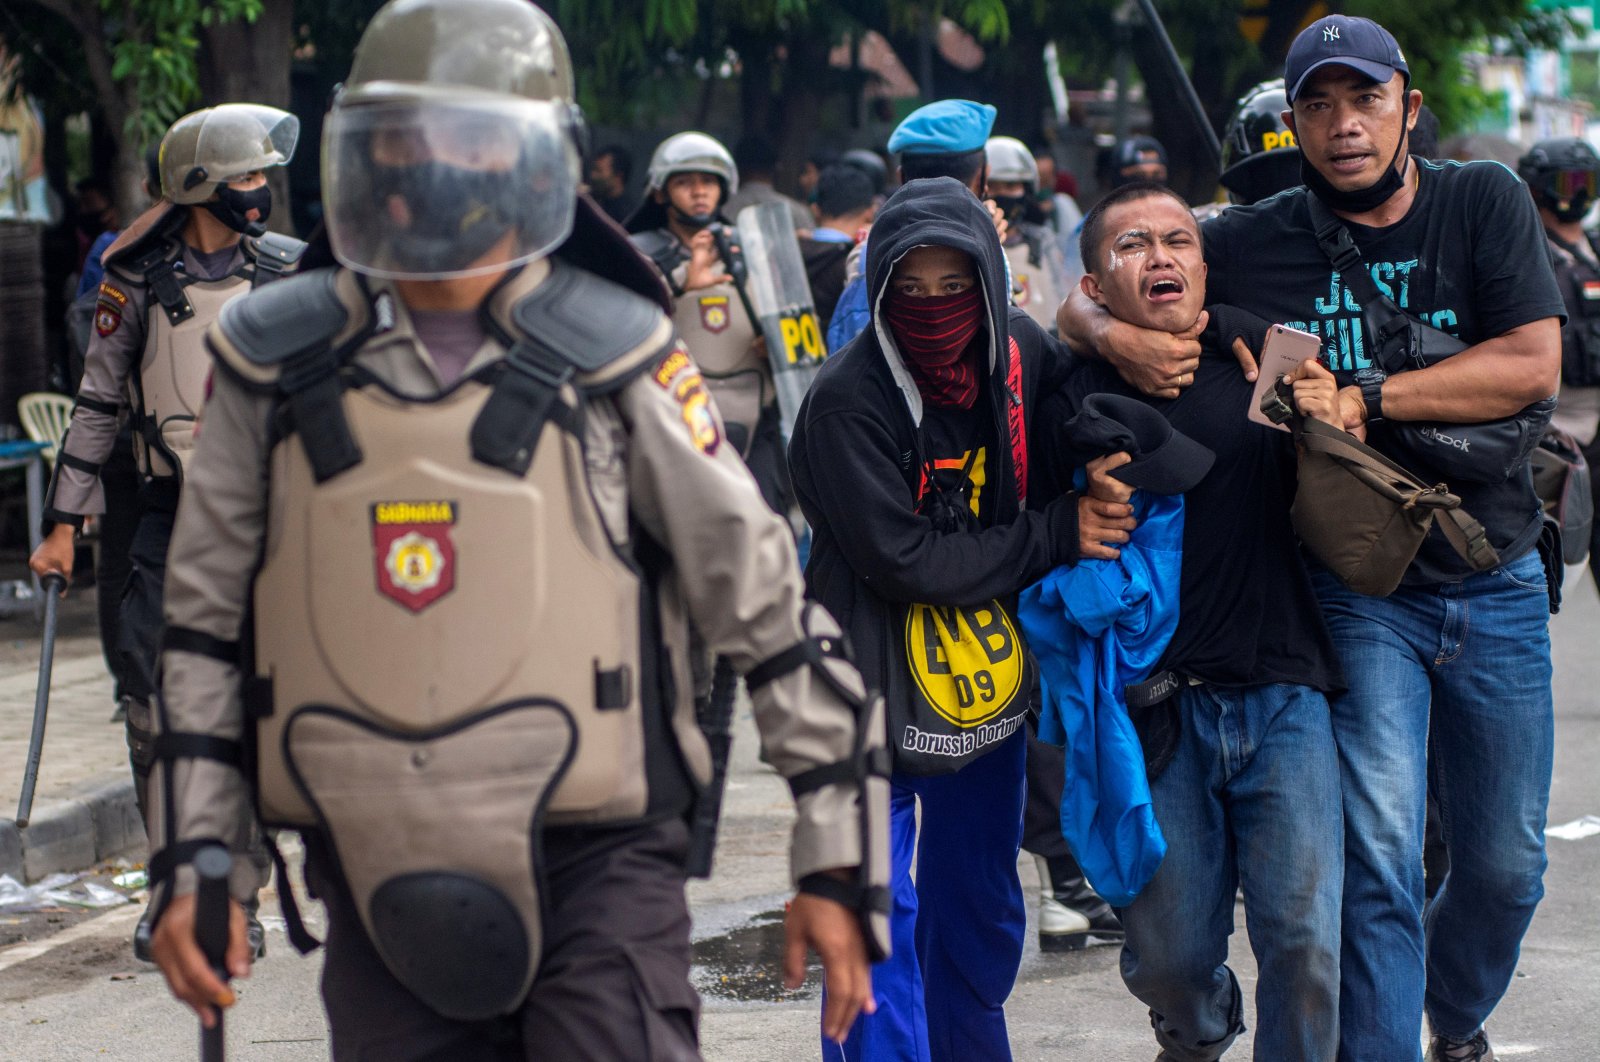 Plainclothes police officers detain a student-demonstrator during a protest against the government's labor reforms in a controversial jobs creation law, outside the regional parliament building in Palu, Central Sulawesi province, Indonesia, Oct. 8, 2020. (Antara Foto/Basri Marzuki/ via Reuters)